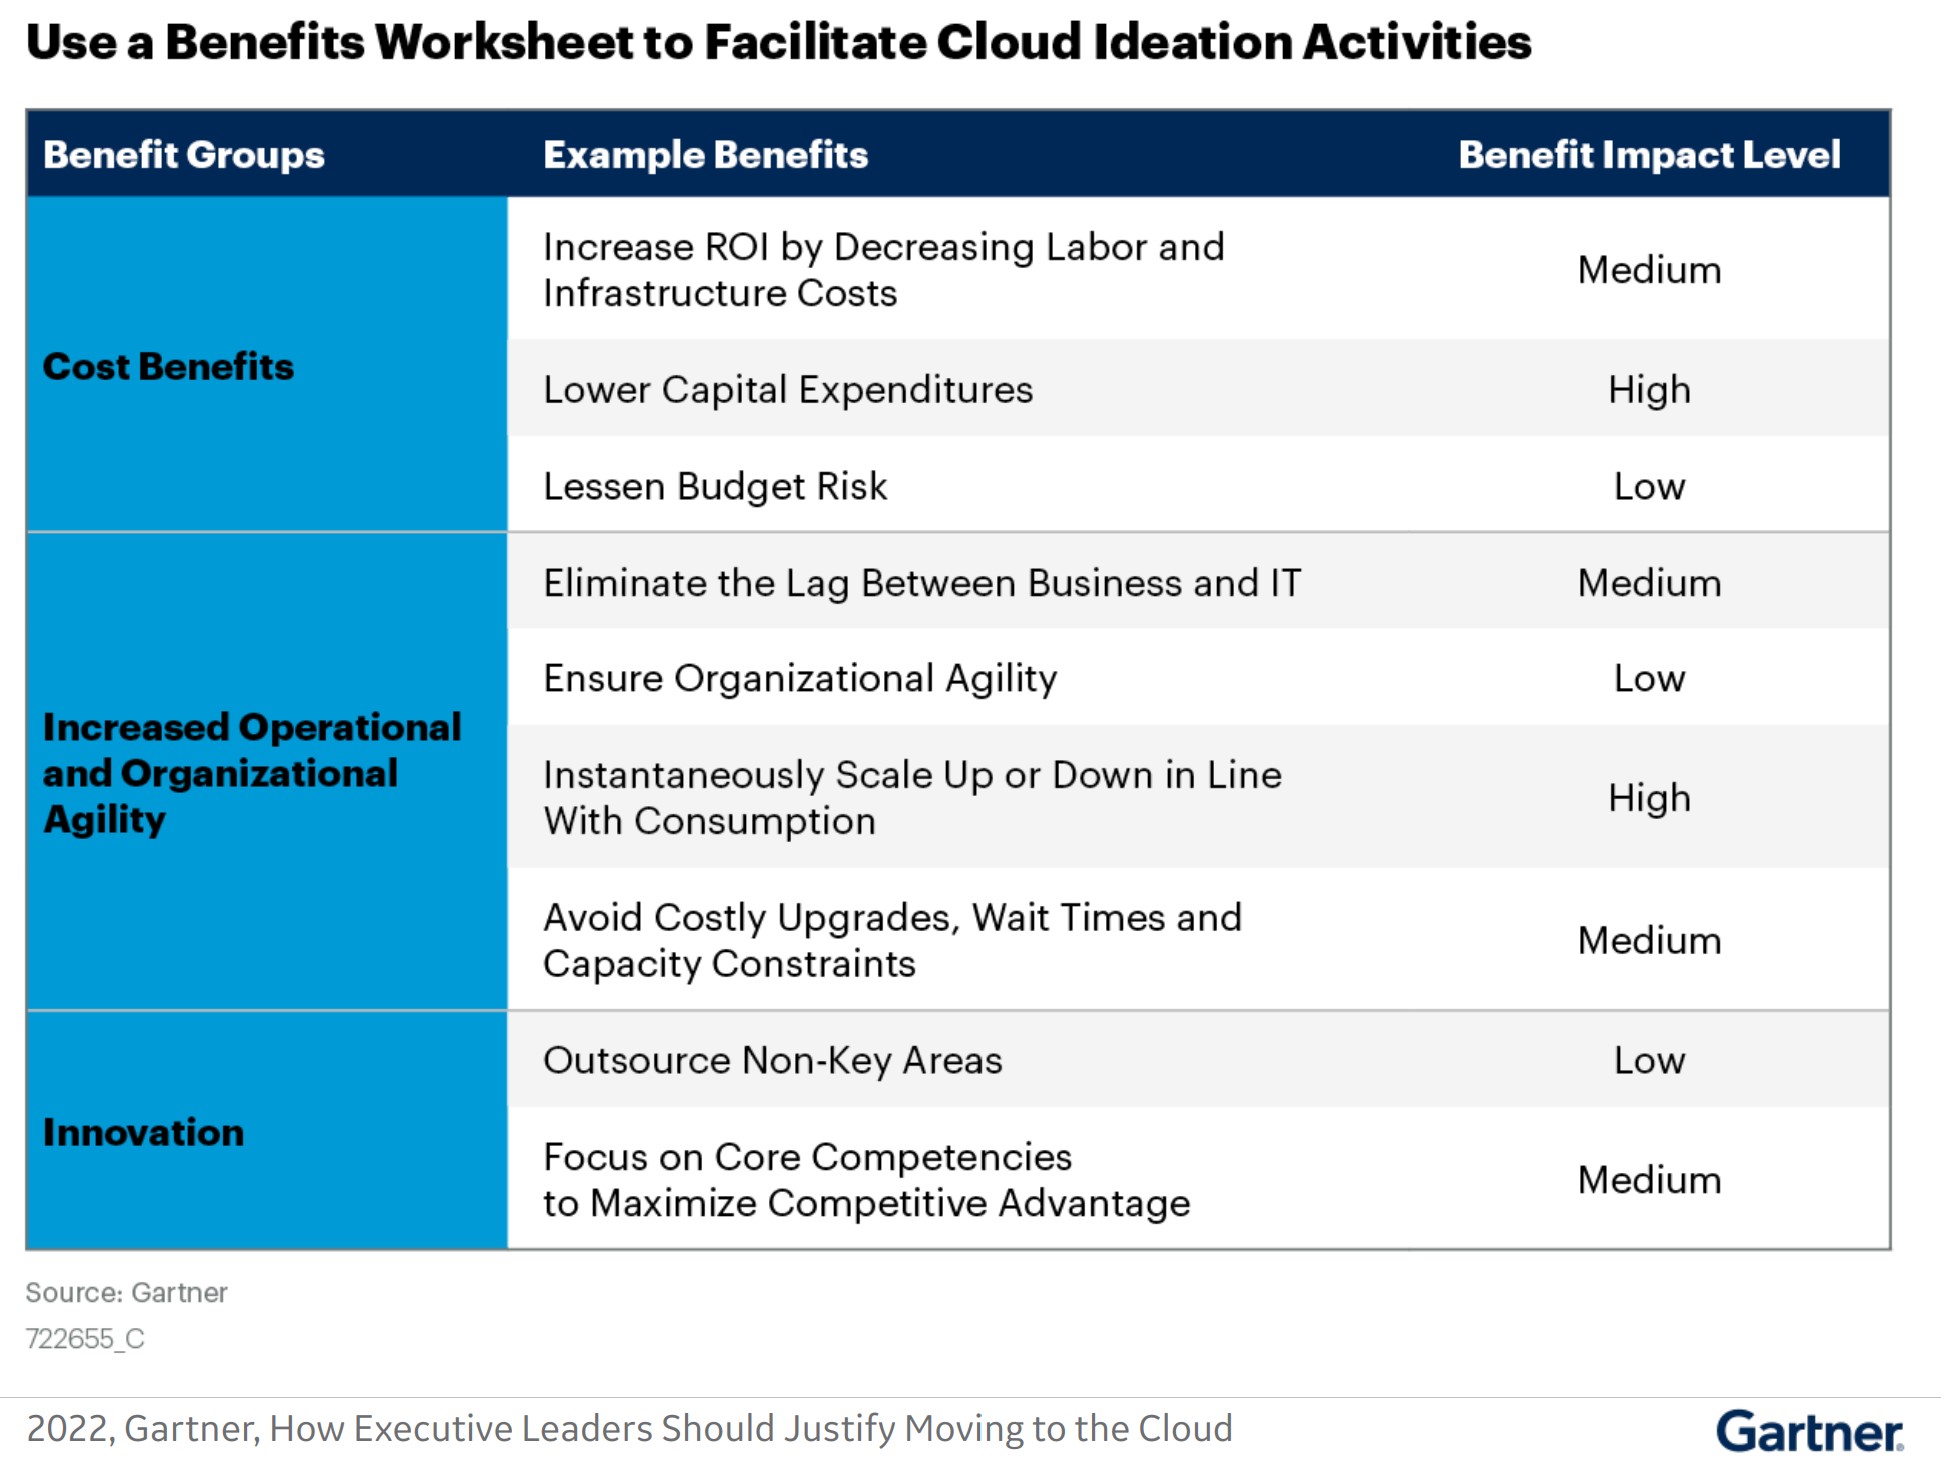 2022, Gartner, How Executive Leaders Should Justify Moving to the Cloud